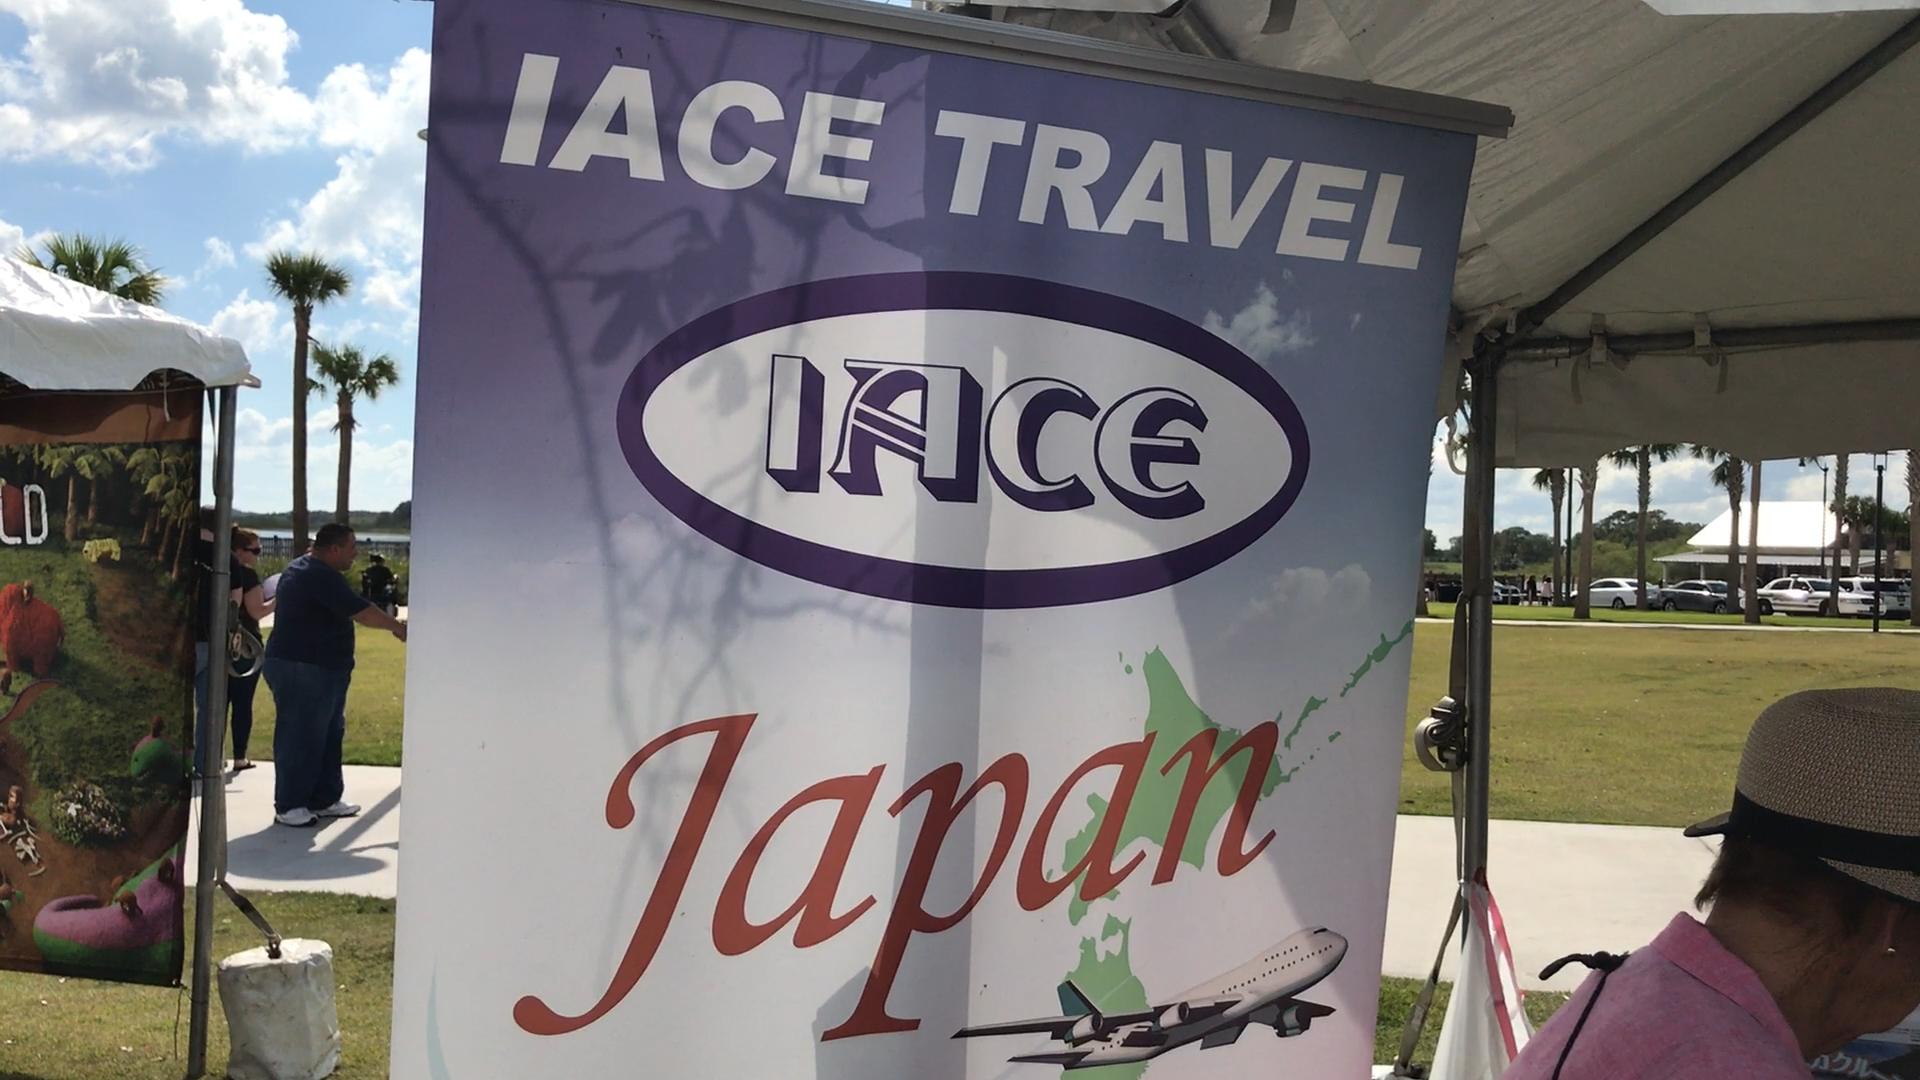 IACE Travel - JAO Orlando Japan Festival Review YouTube Video 2017 Lots of Fun Every Year